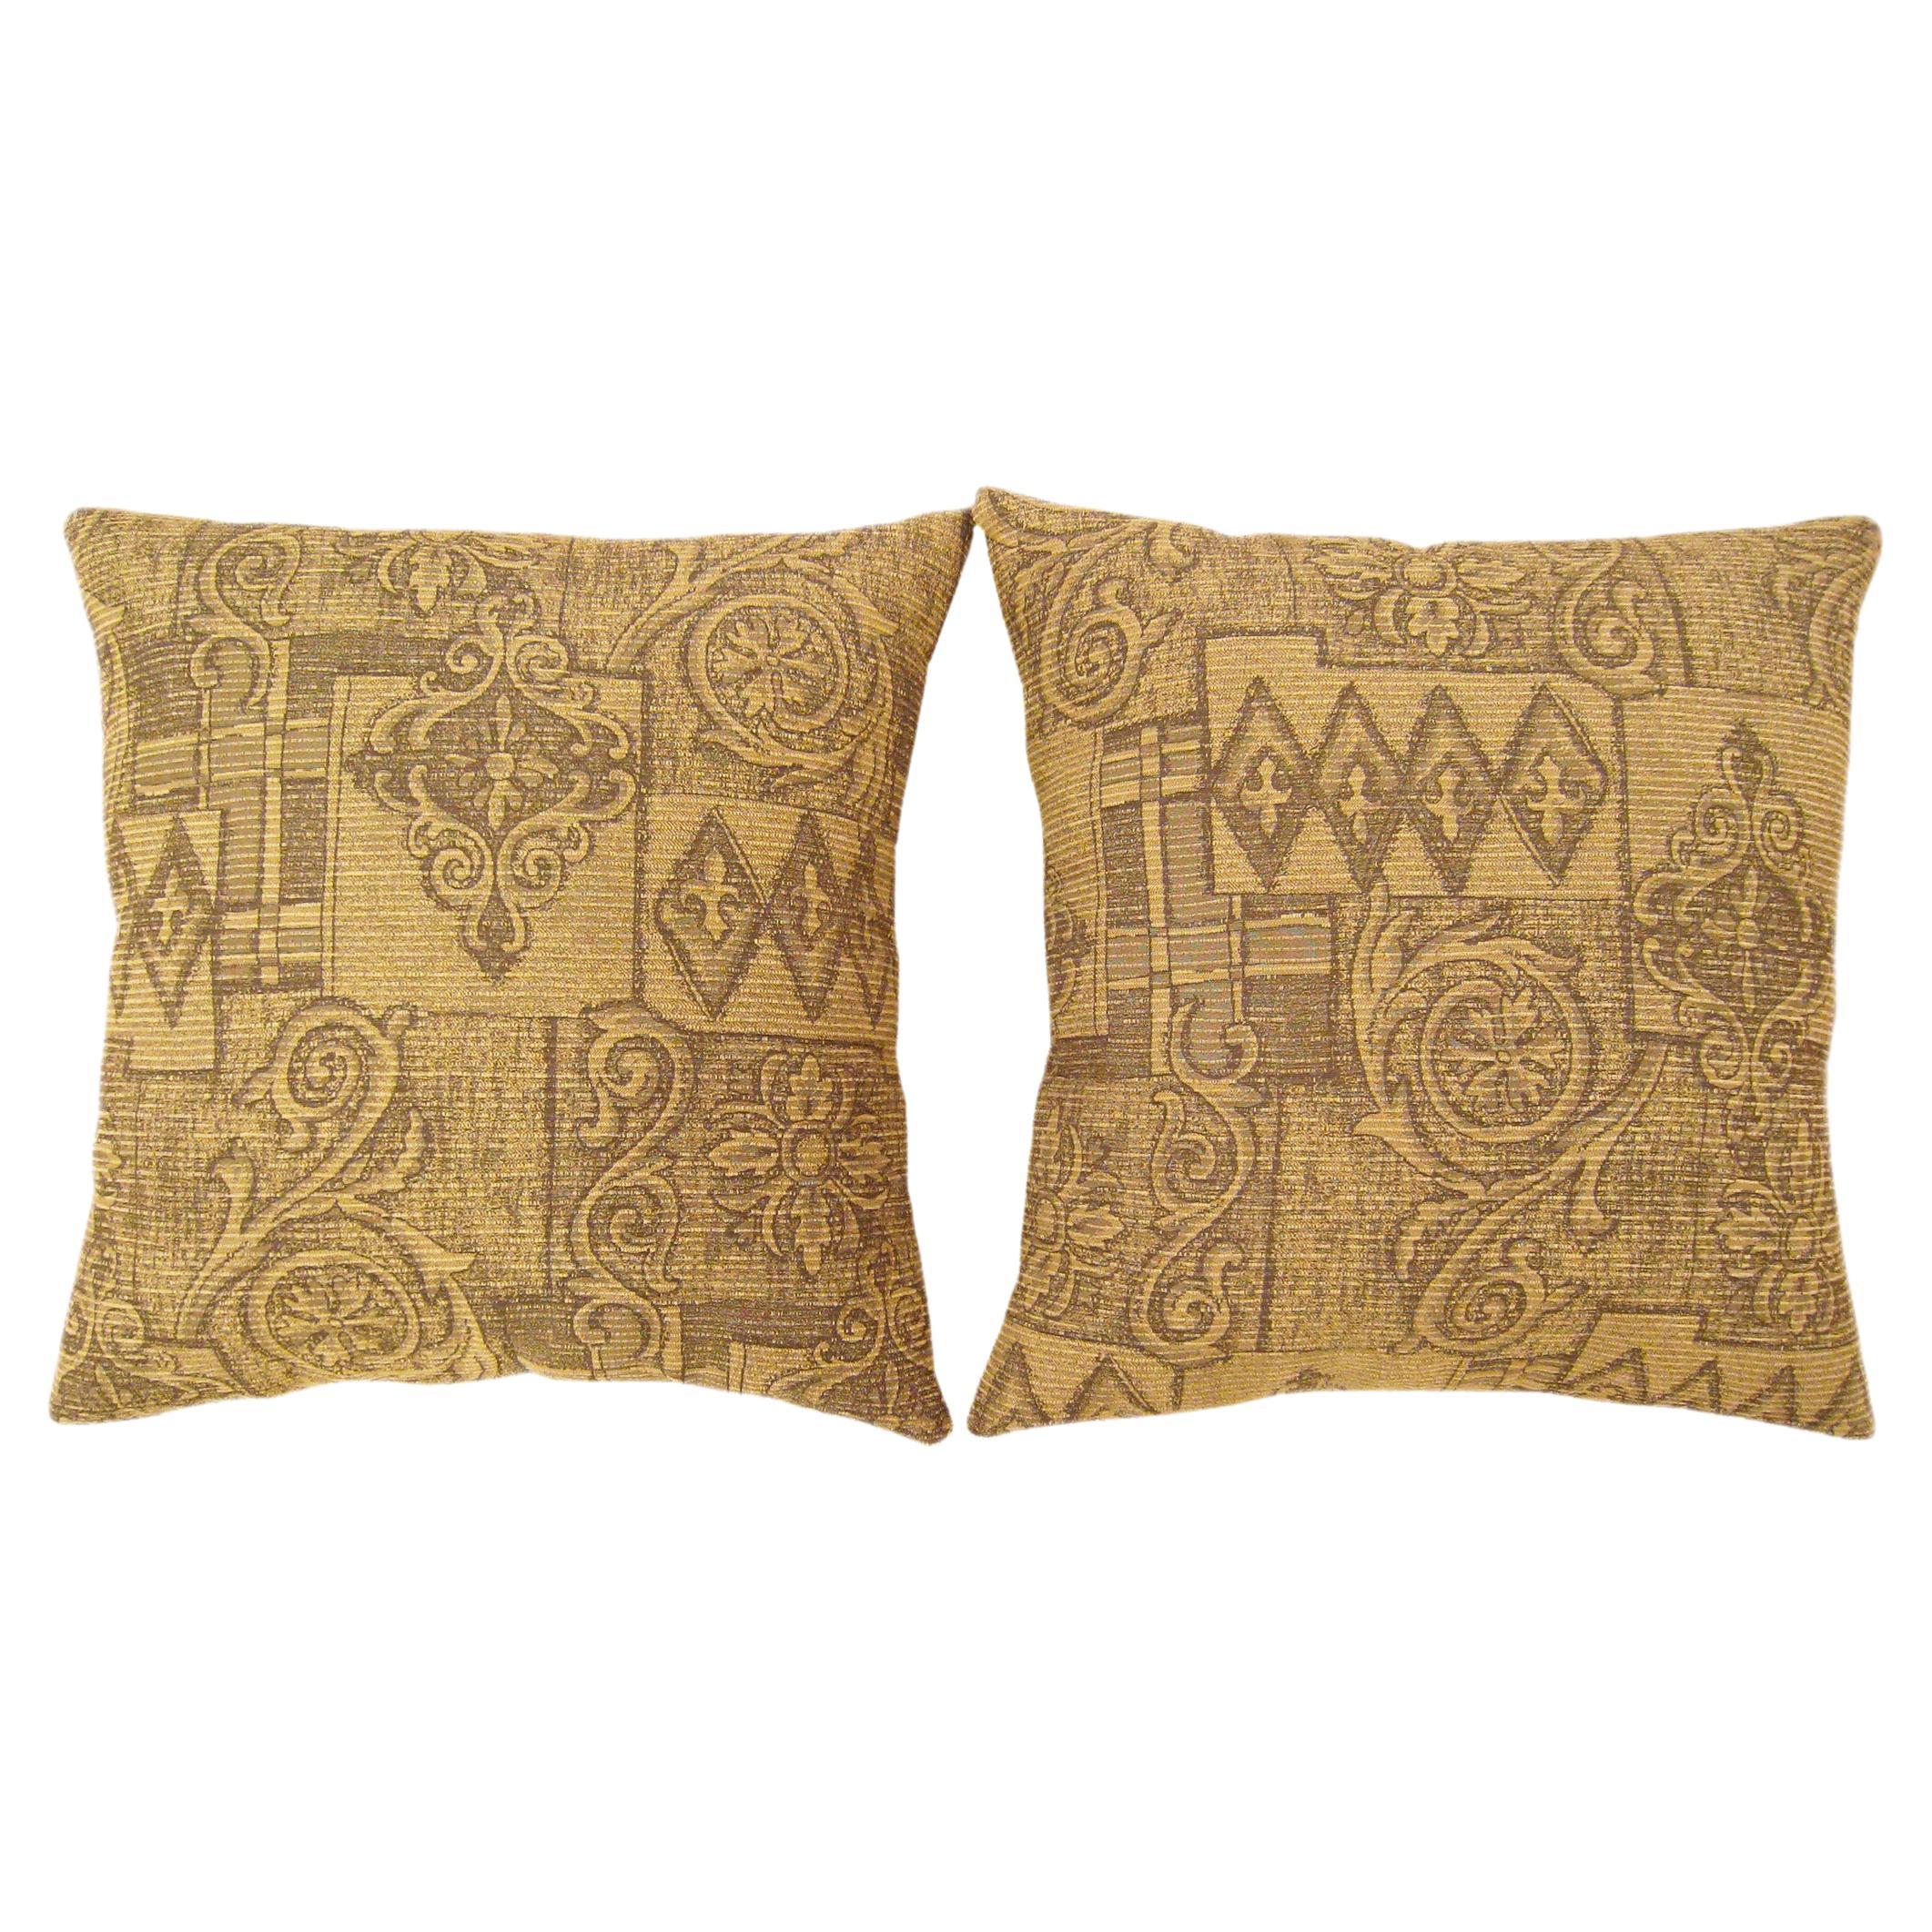 Pair of Decorative Vintage Floro-Geometric Fabric Pillows For Sale